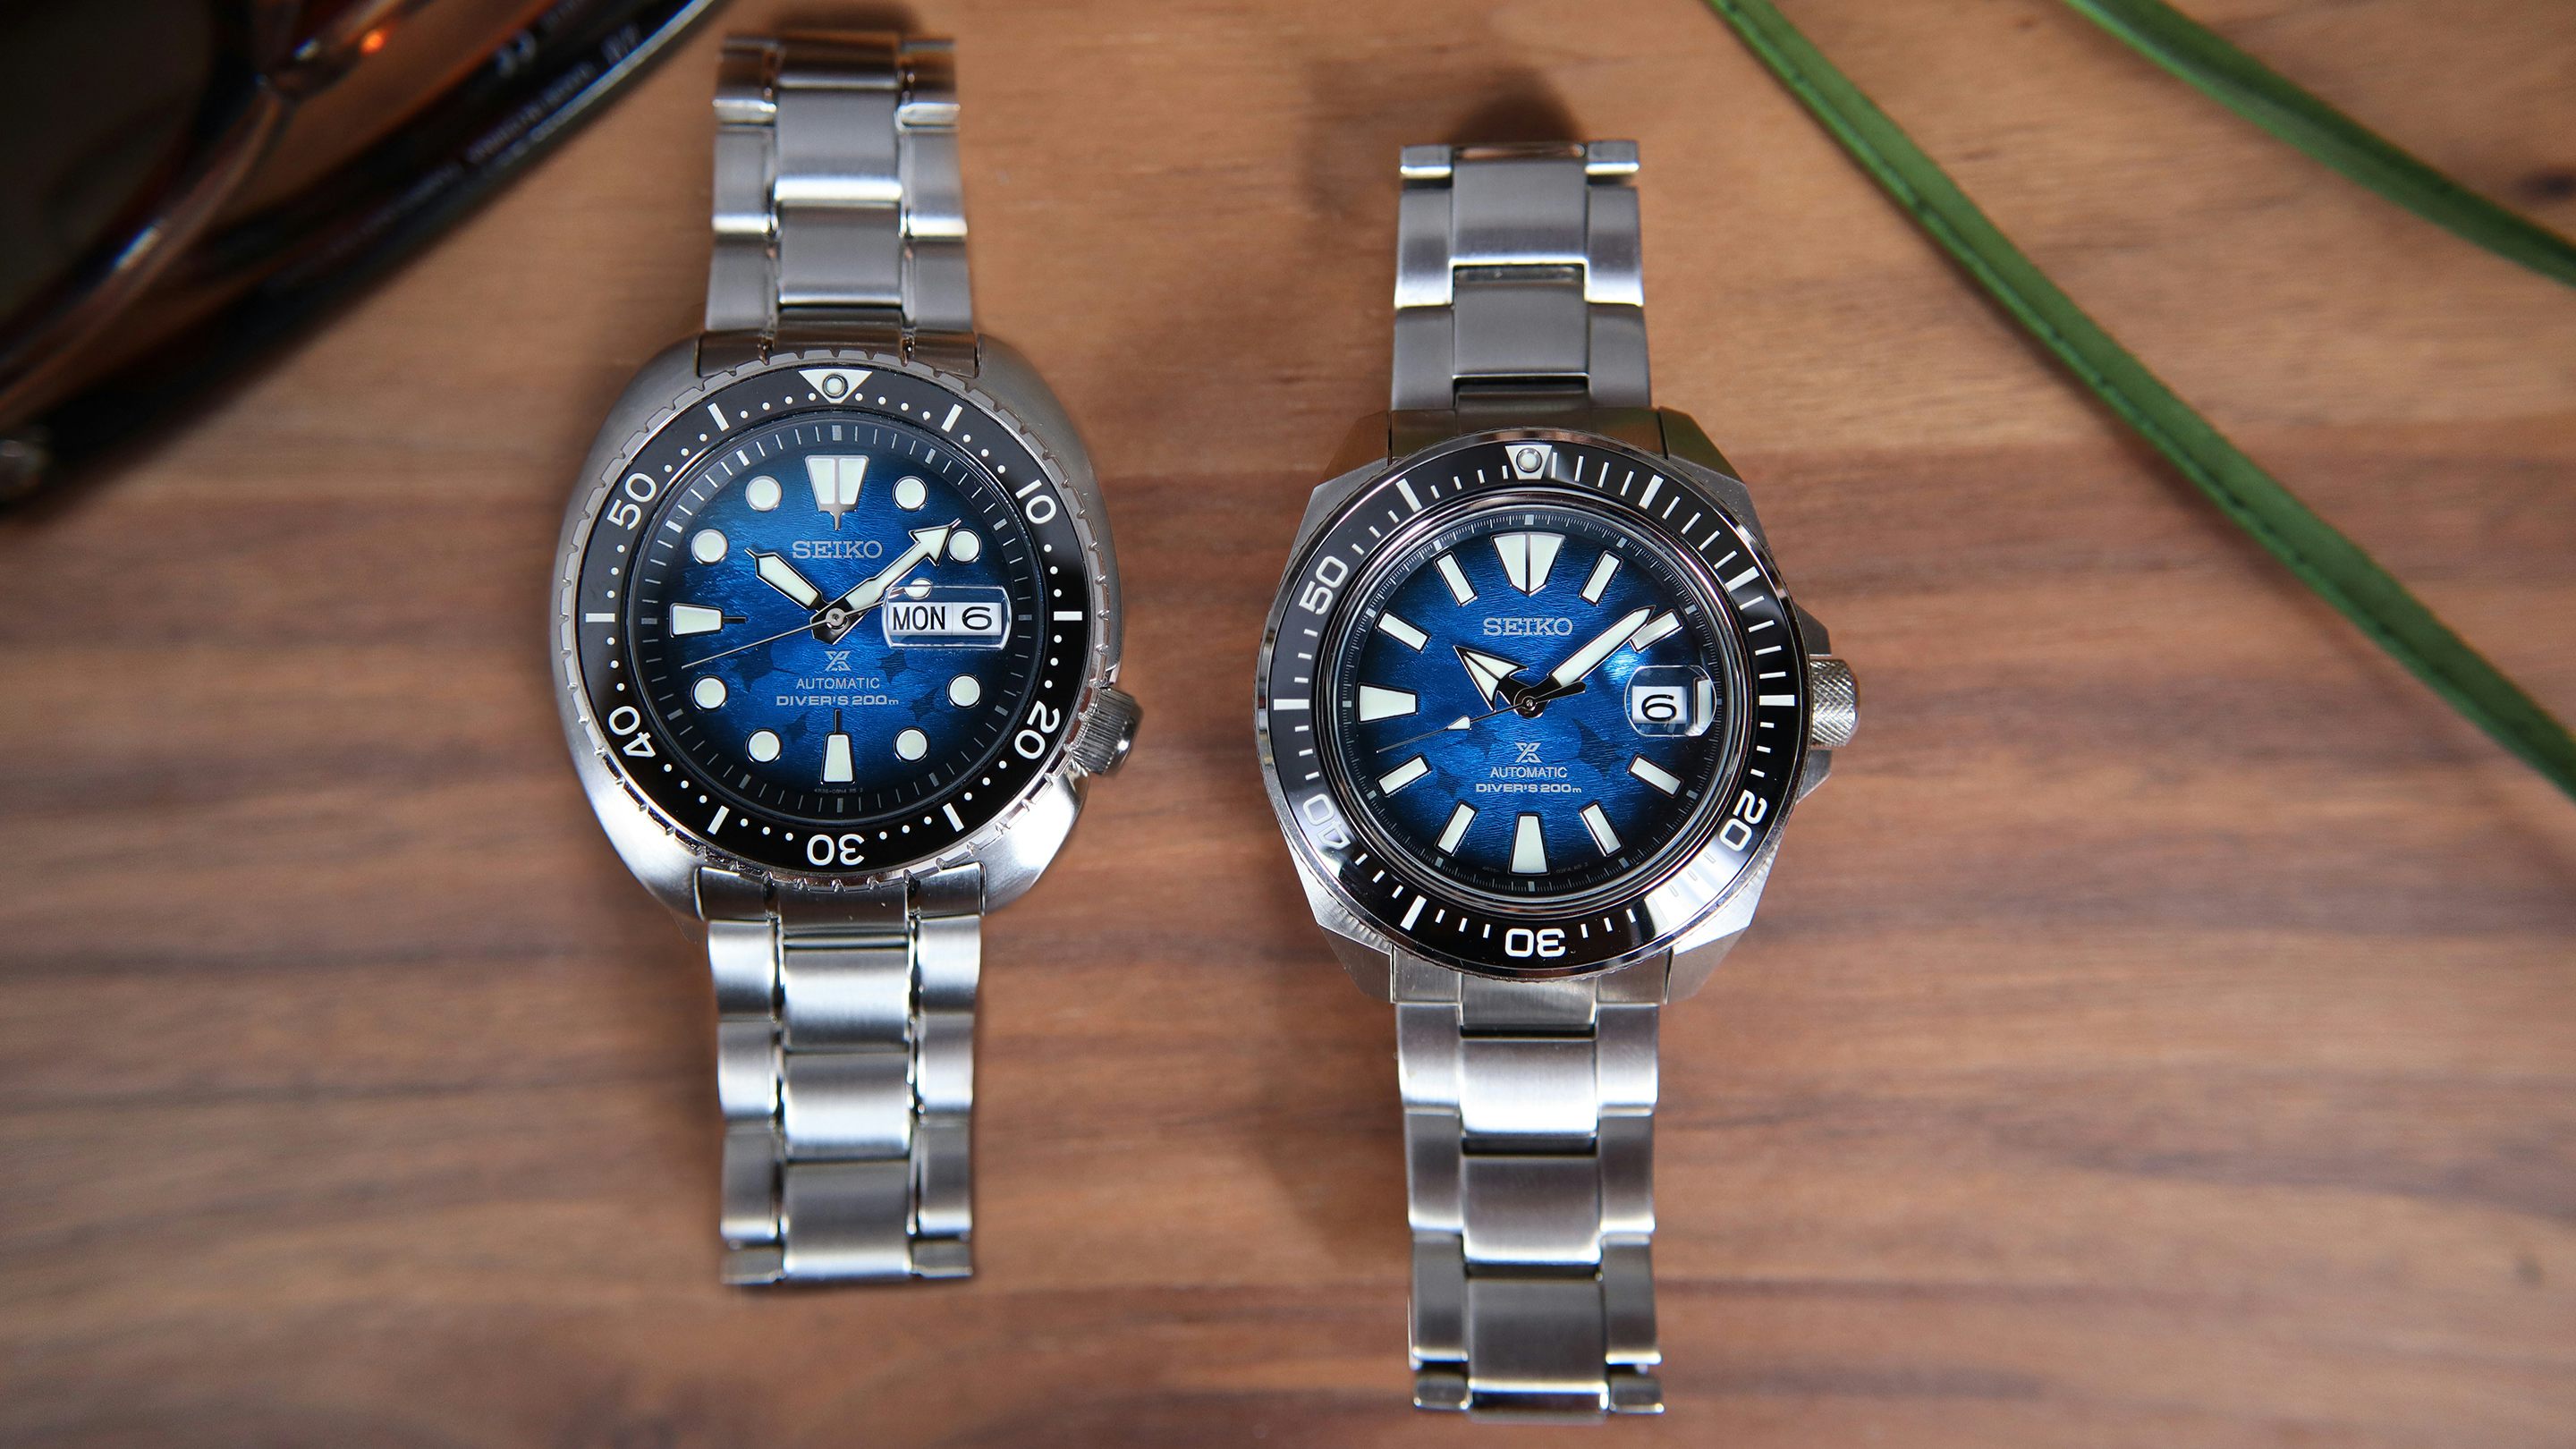 Hands-On: Two Ocean-Blue Seiko Divers With Manta Ray Dials Hodinkee